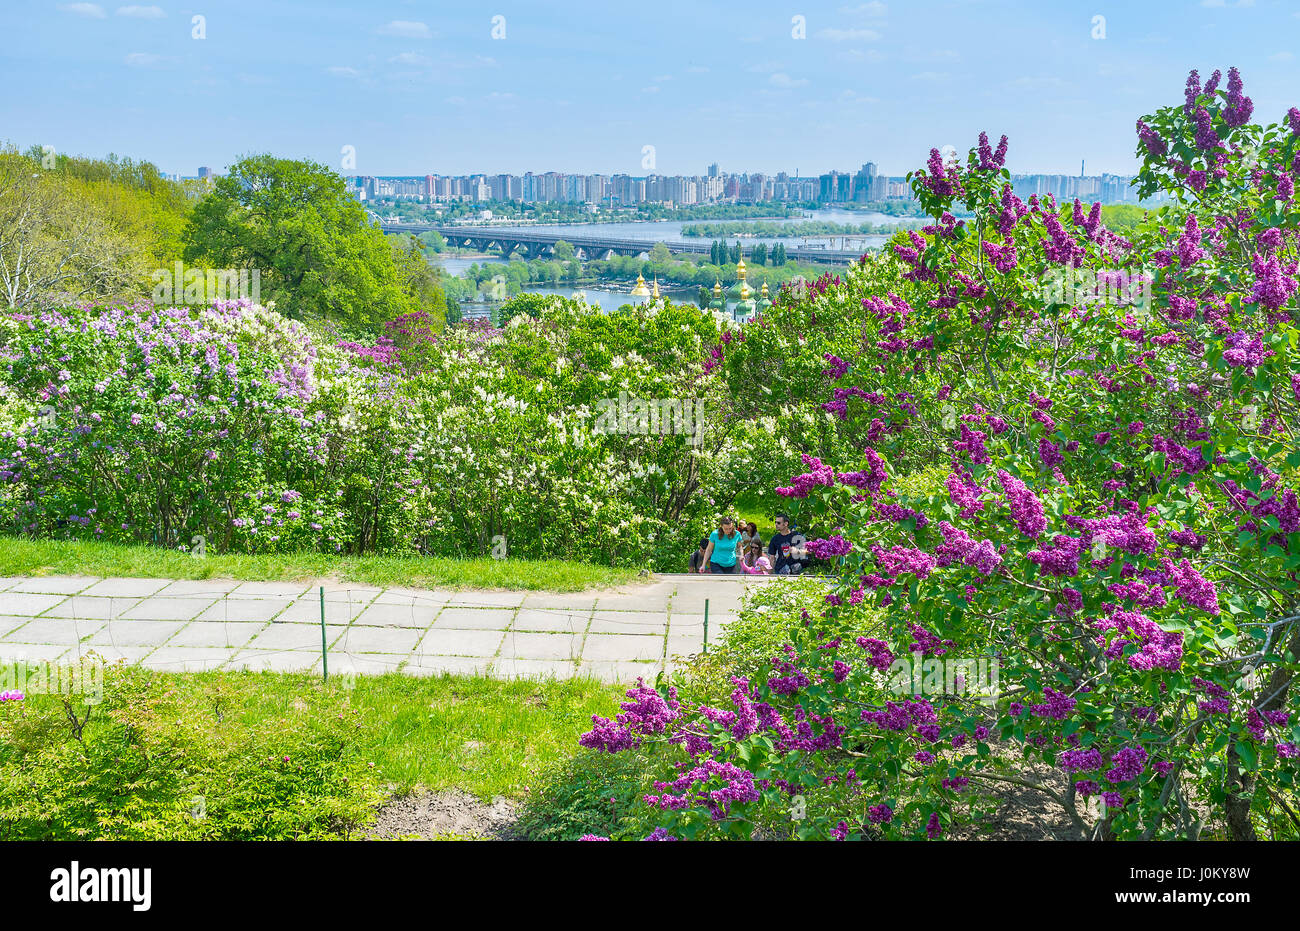 KIEV, UKRAINE - MAY 2, 2016: Botanical Garden becomes very popular during lilac blossom, on May 2, in Kiev Stock Photo